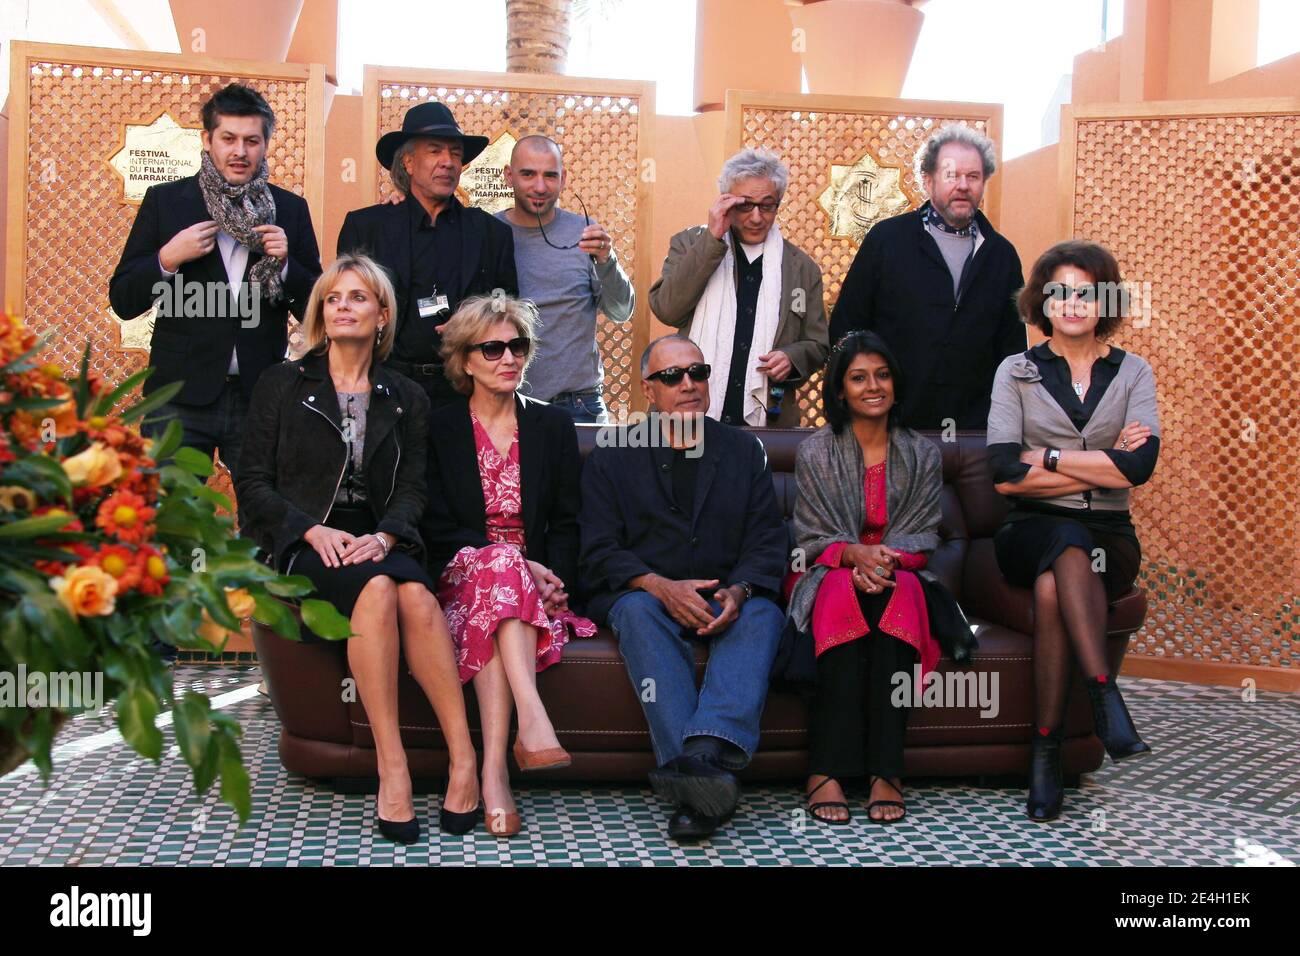 From bottom L: Members of the jury, Italian actress Isabella Ferrari, Spanish actress Marisa Paredes, Iranian film director and president of the jury Abbas Kiarostami, Indian film actress and director Nandita Das, French actress Fanny Ardant, from top L: French director Christophe Honore, Moroccan dancer and choreographer Lahcen Zinoun, Argentine film producer Pablo Trapero, Palestinian director Elia Suleiman and British director Mike Figgis pose during a photocall at the 9th edition of the Marrakech International Film Festival in Morocco, on December 5, 2009. Photo by Denis Guignebourg/ABACAP Stock Photo